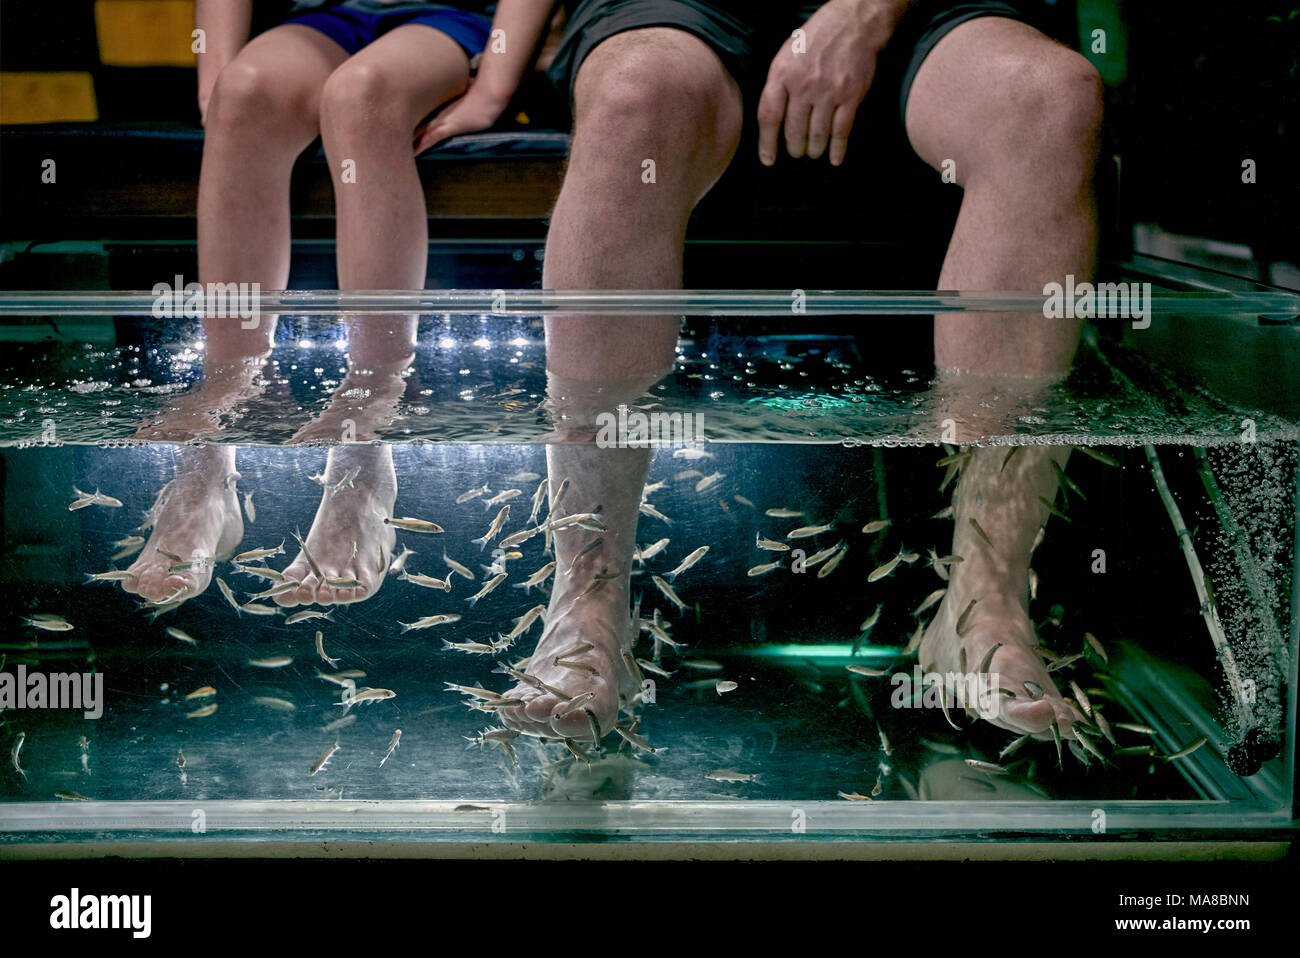 Pedicure. Fish spa treatment involving customers placing their feet into a water tank filled with toothless garra rufa fish, also known as 'doc. Stock Photo